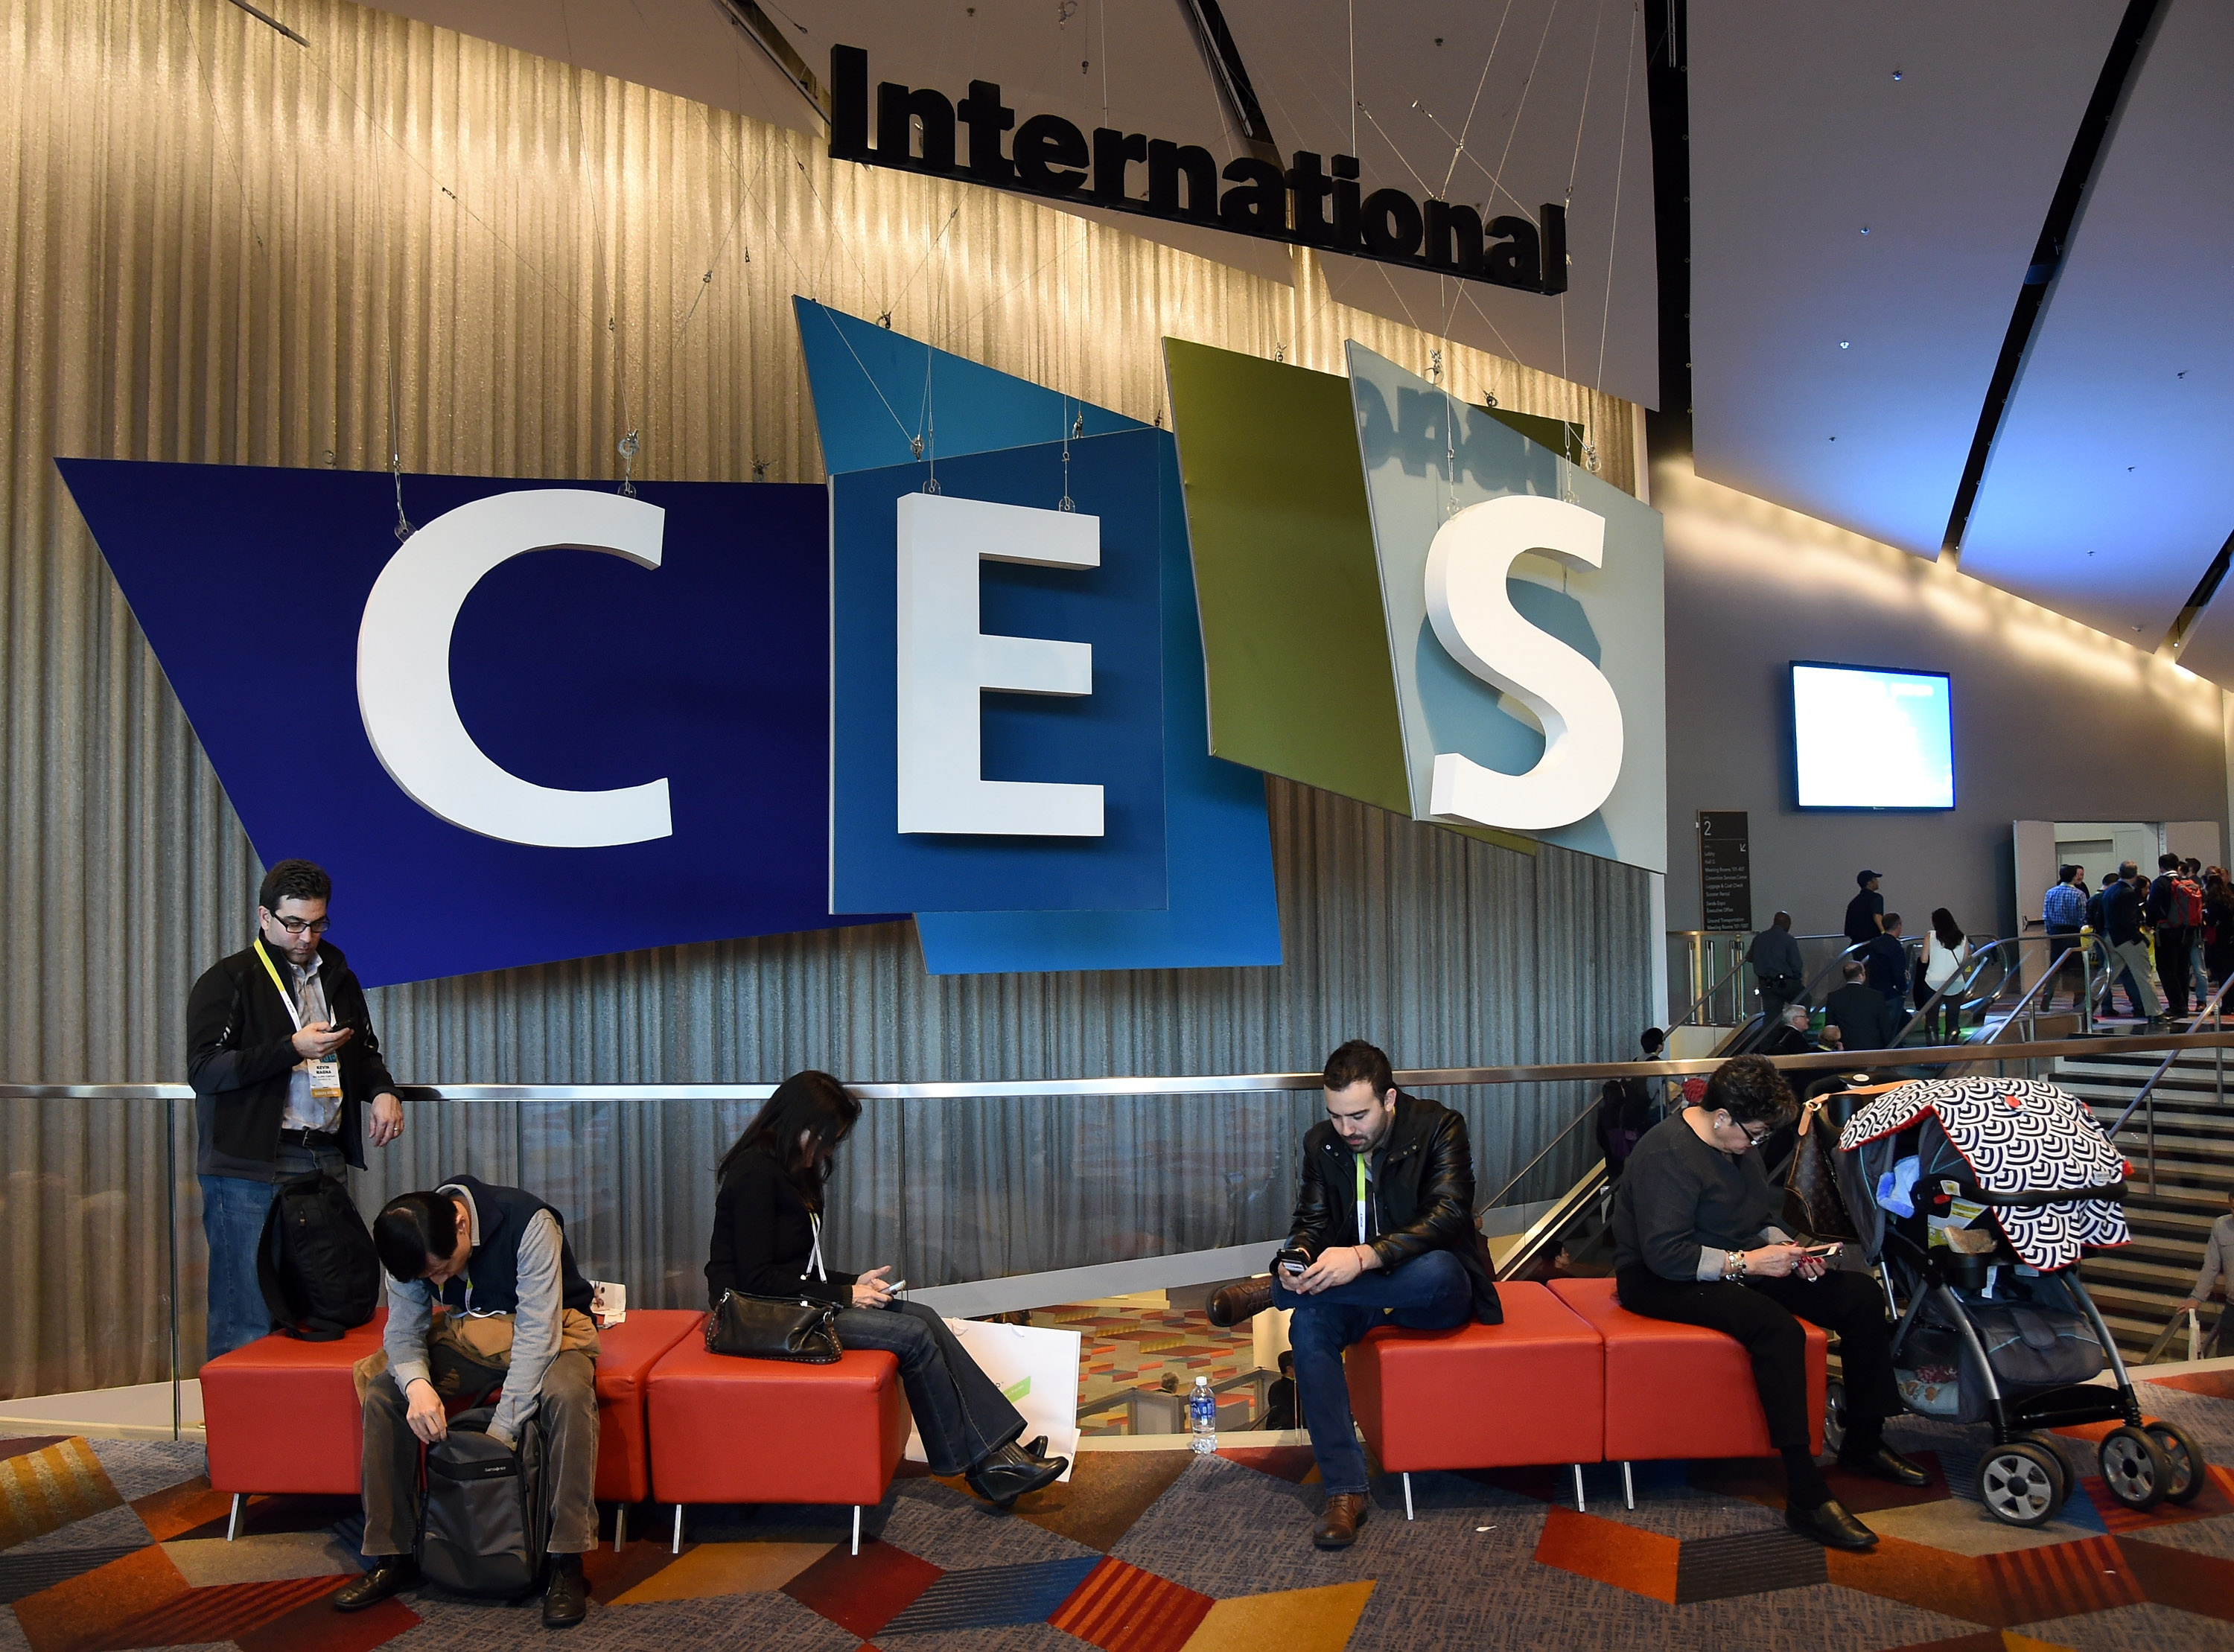 Attendees take a break at the 2015 International CES on Jan. 6, 2015 in Las Vegas, Nevada.